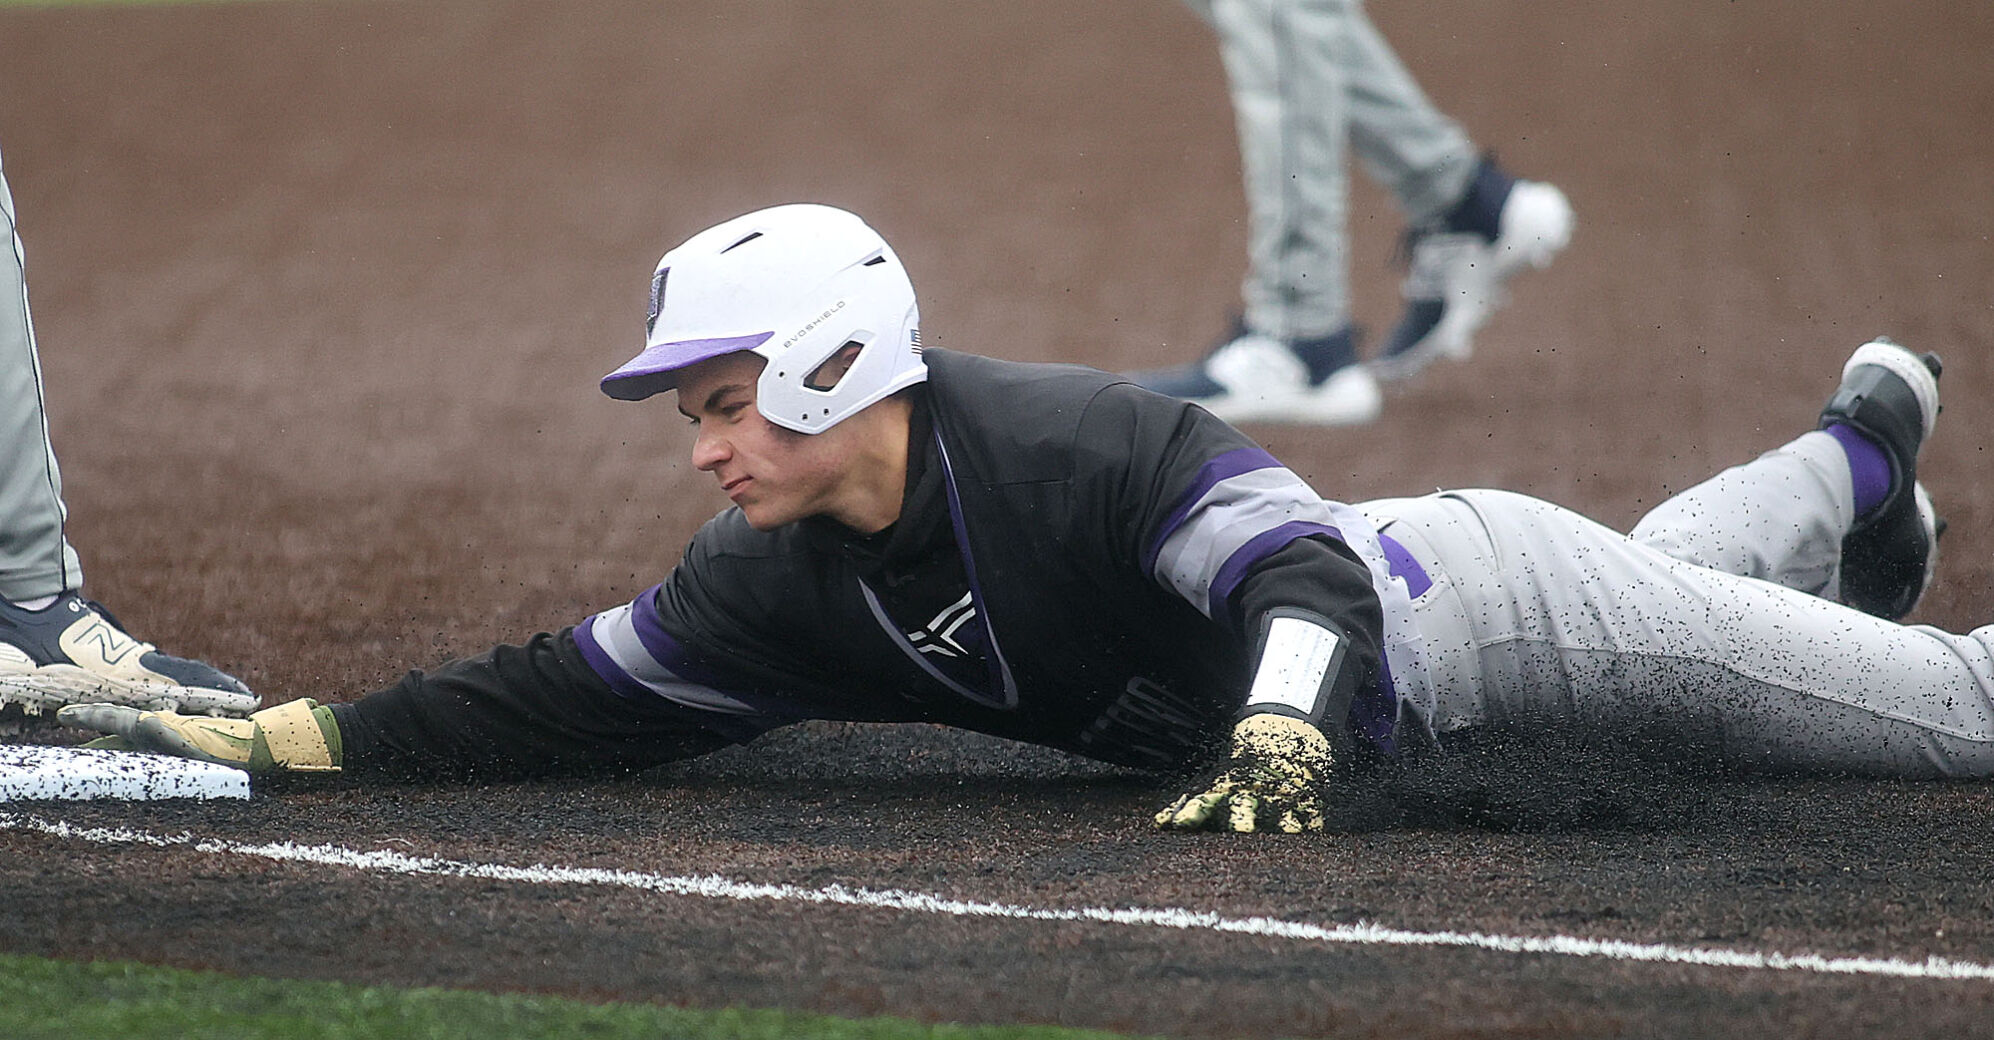 Tuesday Sports Highlights: Northwestern’s Baseball Team Secures Victory Over Sheridan with Late Comeback